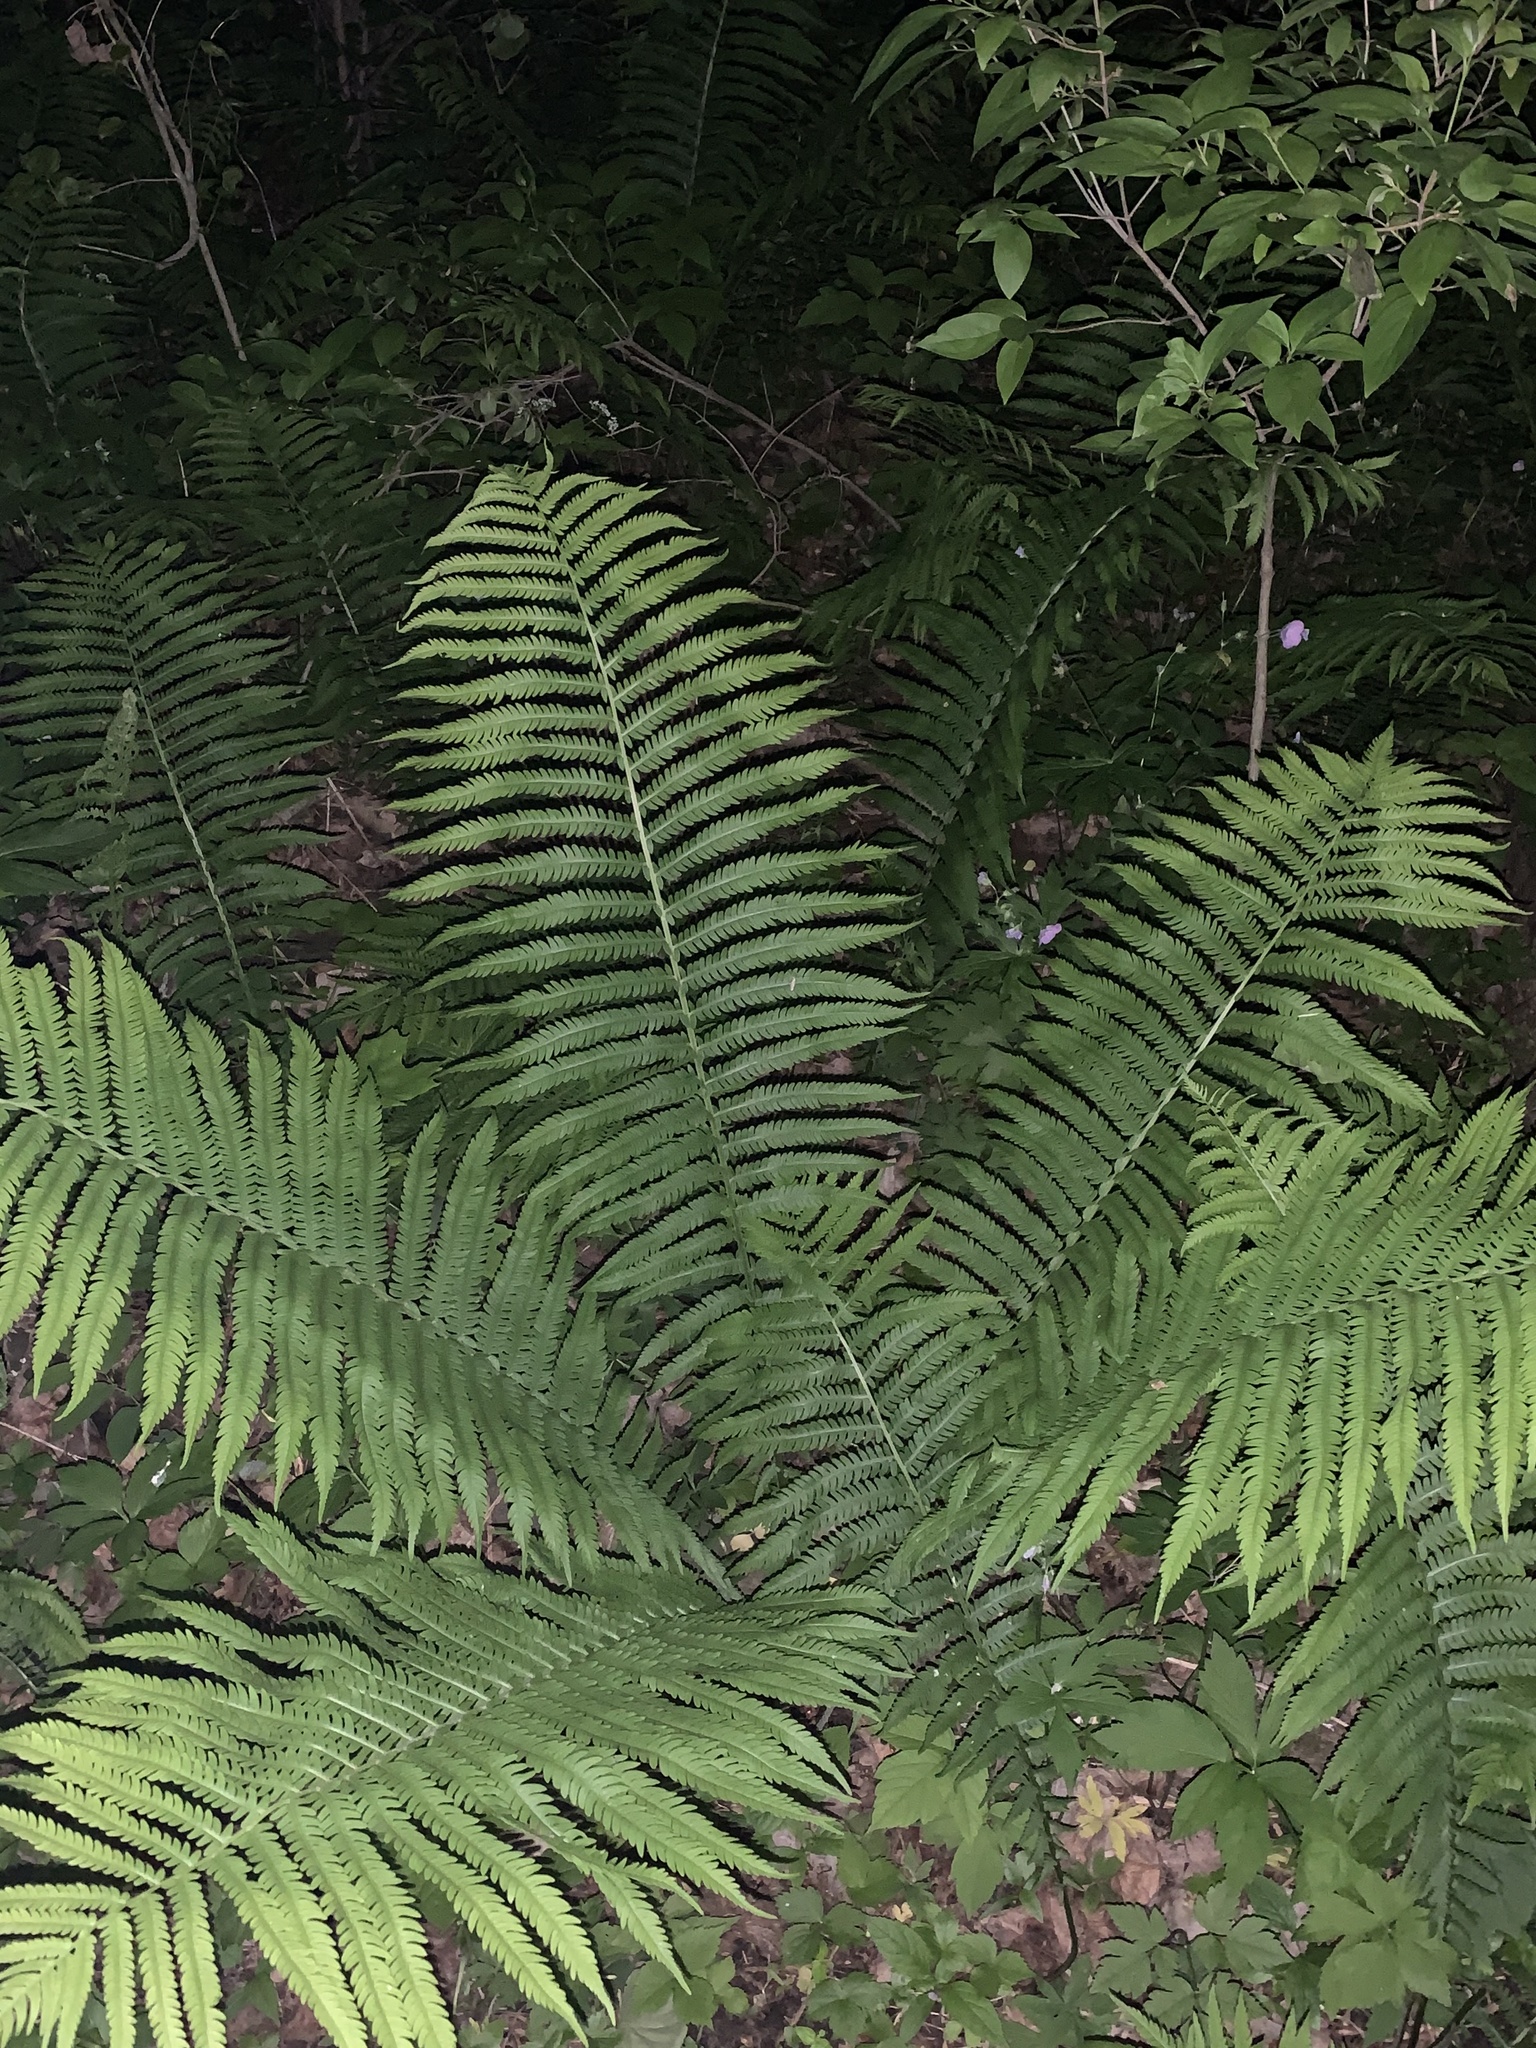 A large ostrich fern plant grows on the forest floor. It has five large, compound leaves that emerge from the ground at a shared point.